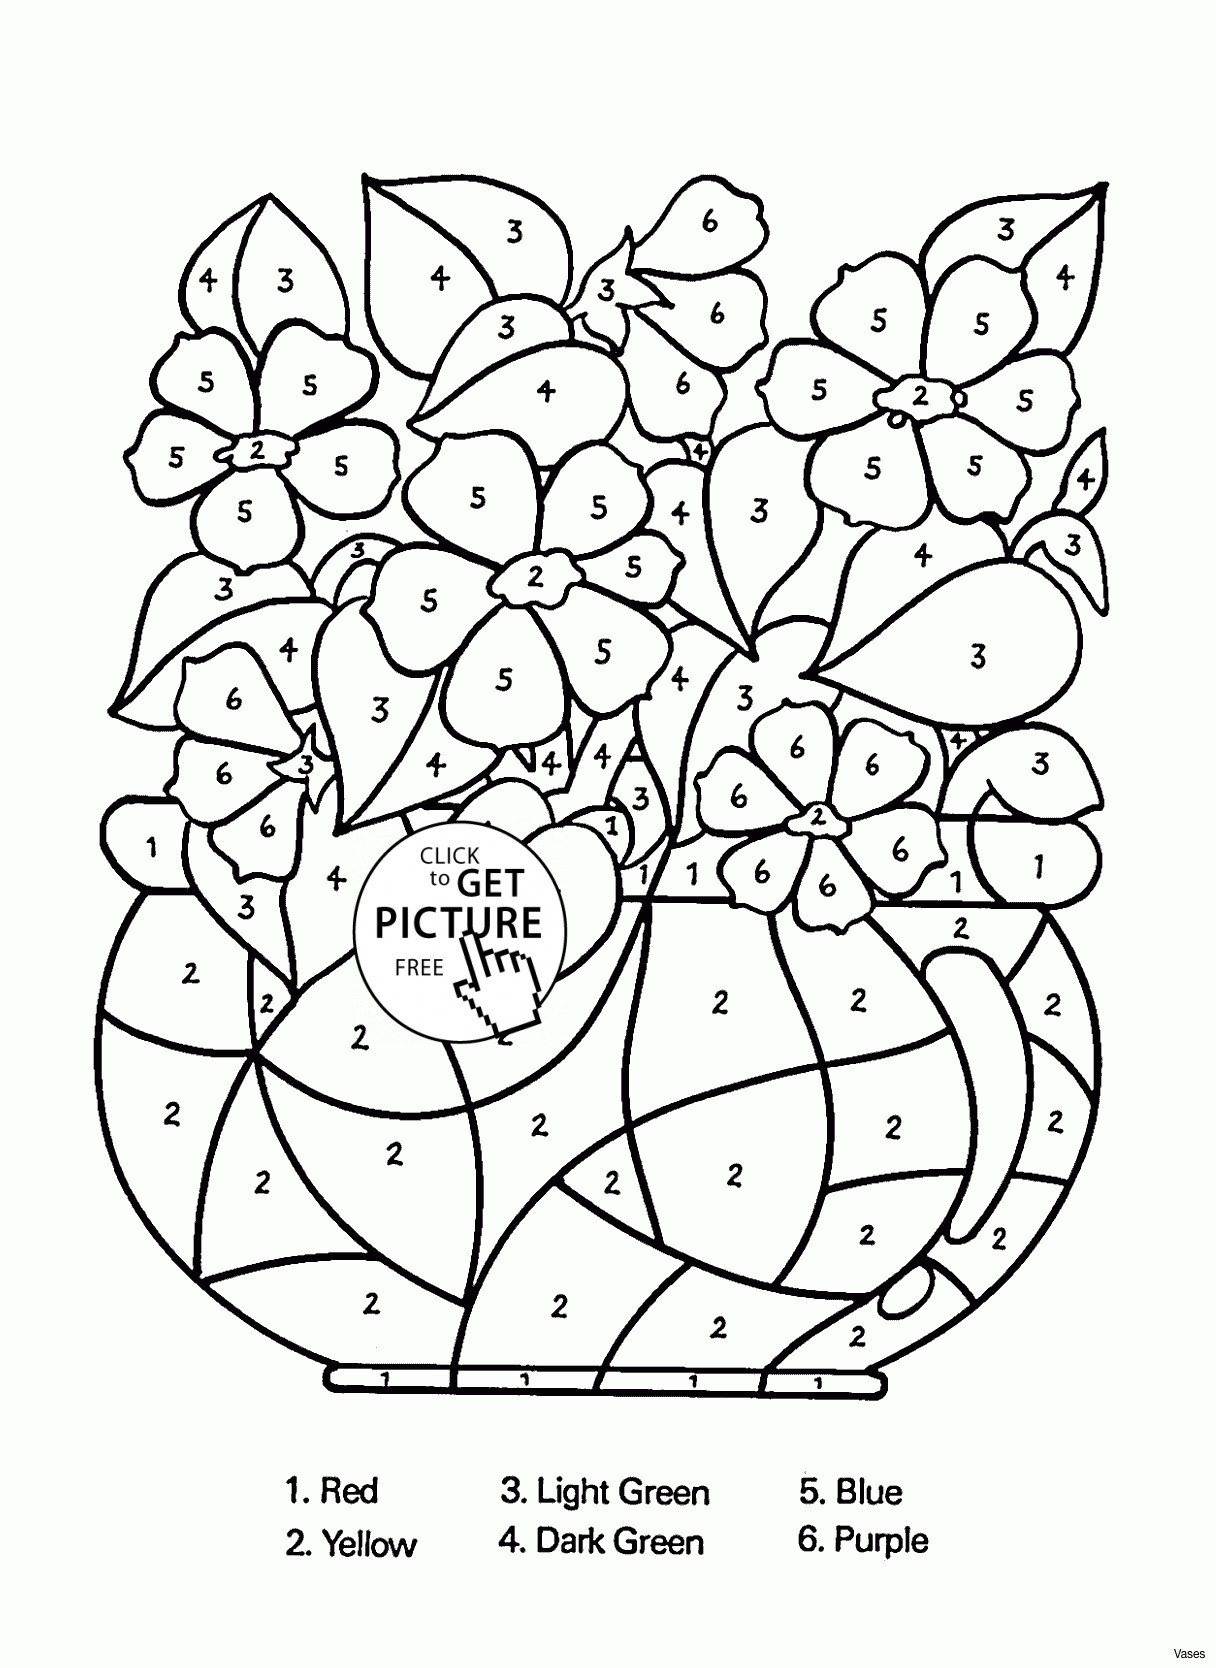 24 Unique Rectangle Vases Cheap 2024 free download rectangle vases cheap of dark green pillows new cool vases flower vase coloring page pages pertaining to dark green pillows new cool vases flower vase coloring page pages flowers in a top i